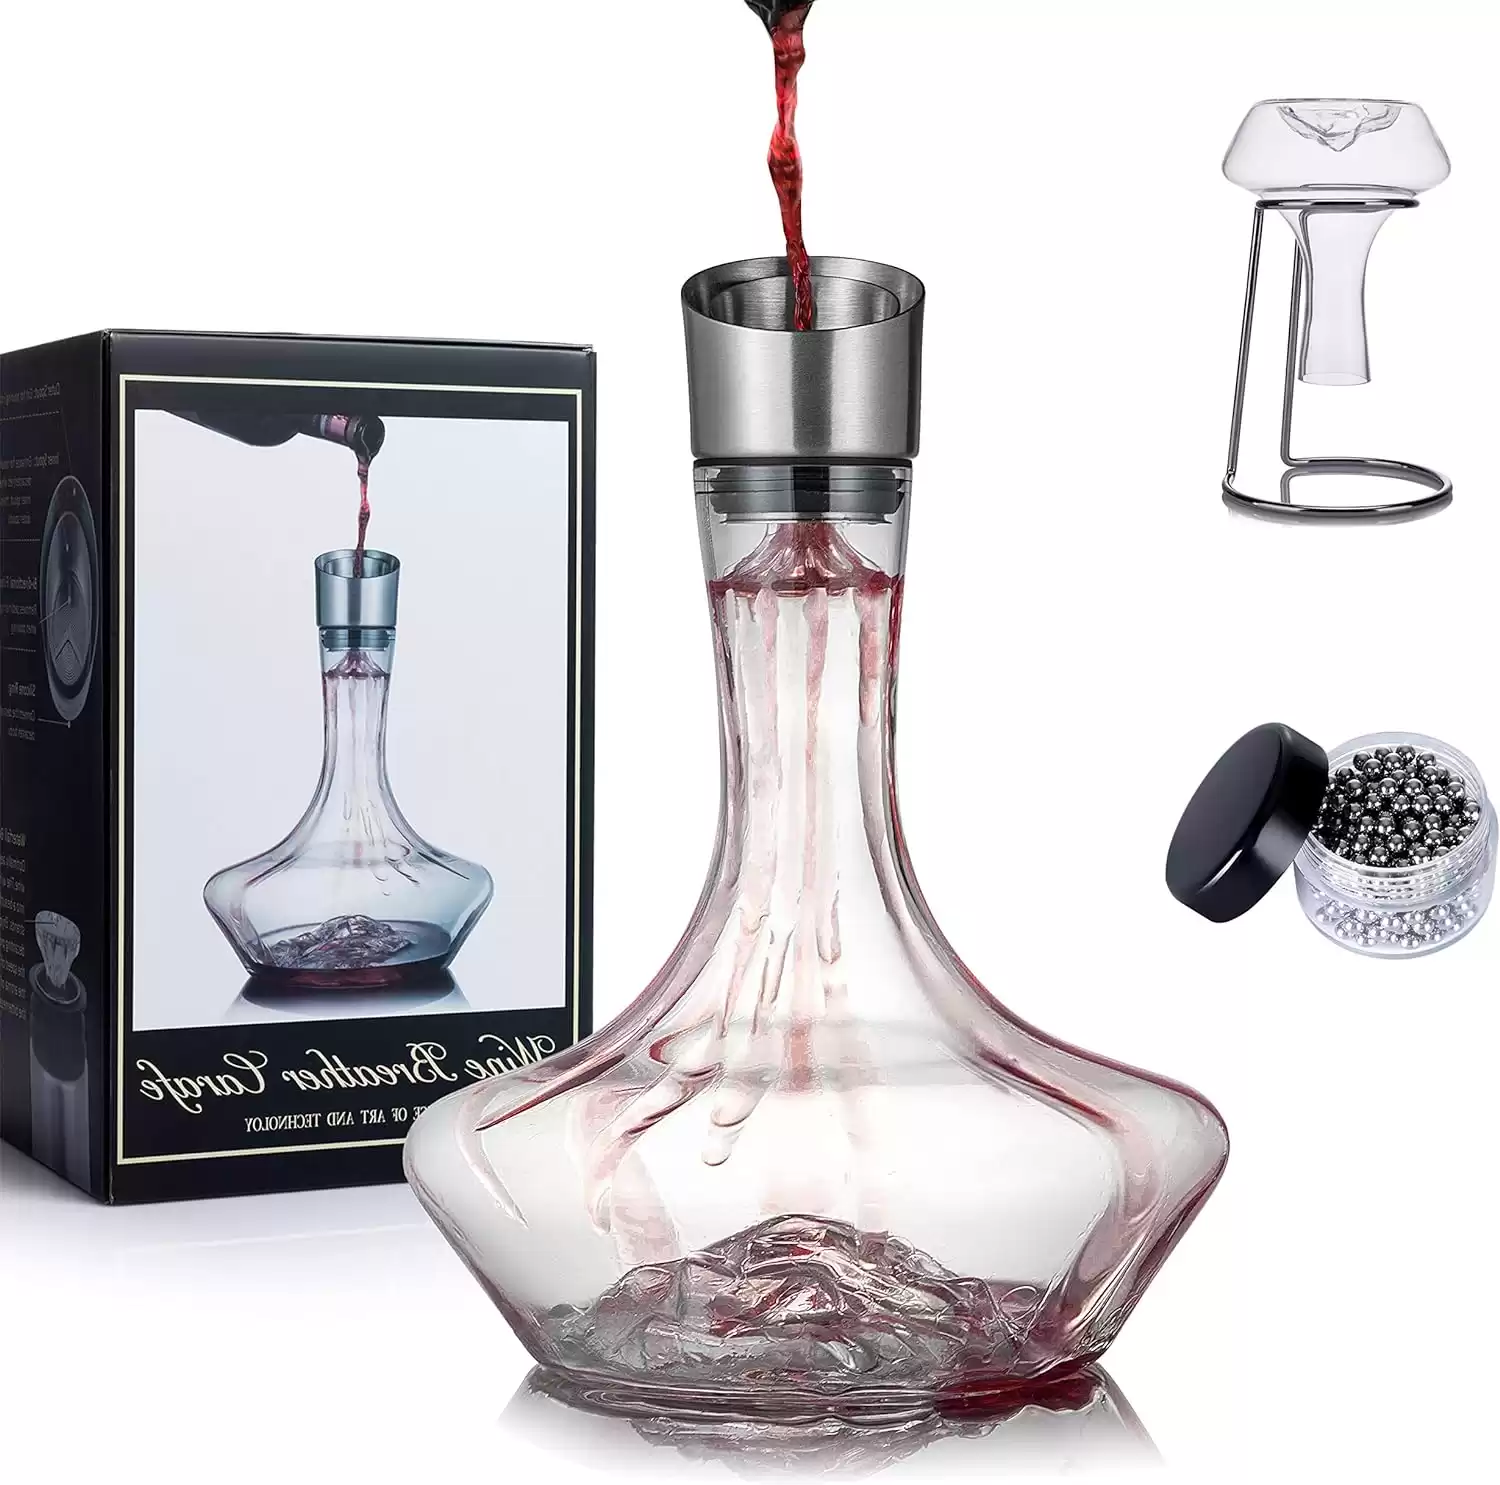 YouYah Iceberg Wine Decanter Set with Aerator Filter, Drying Stand and Cleaning Beads